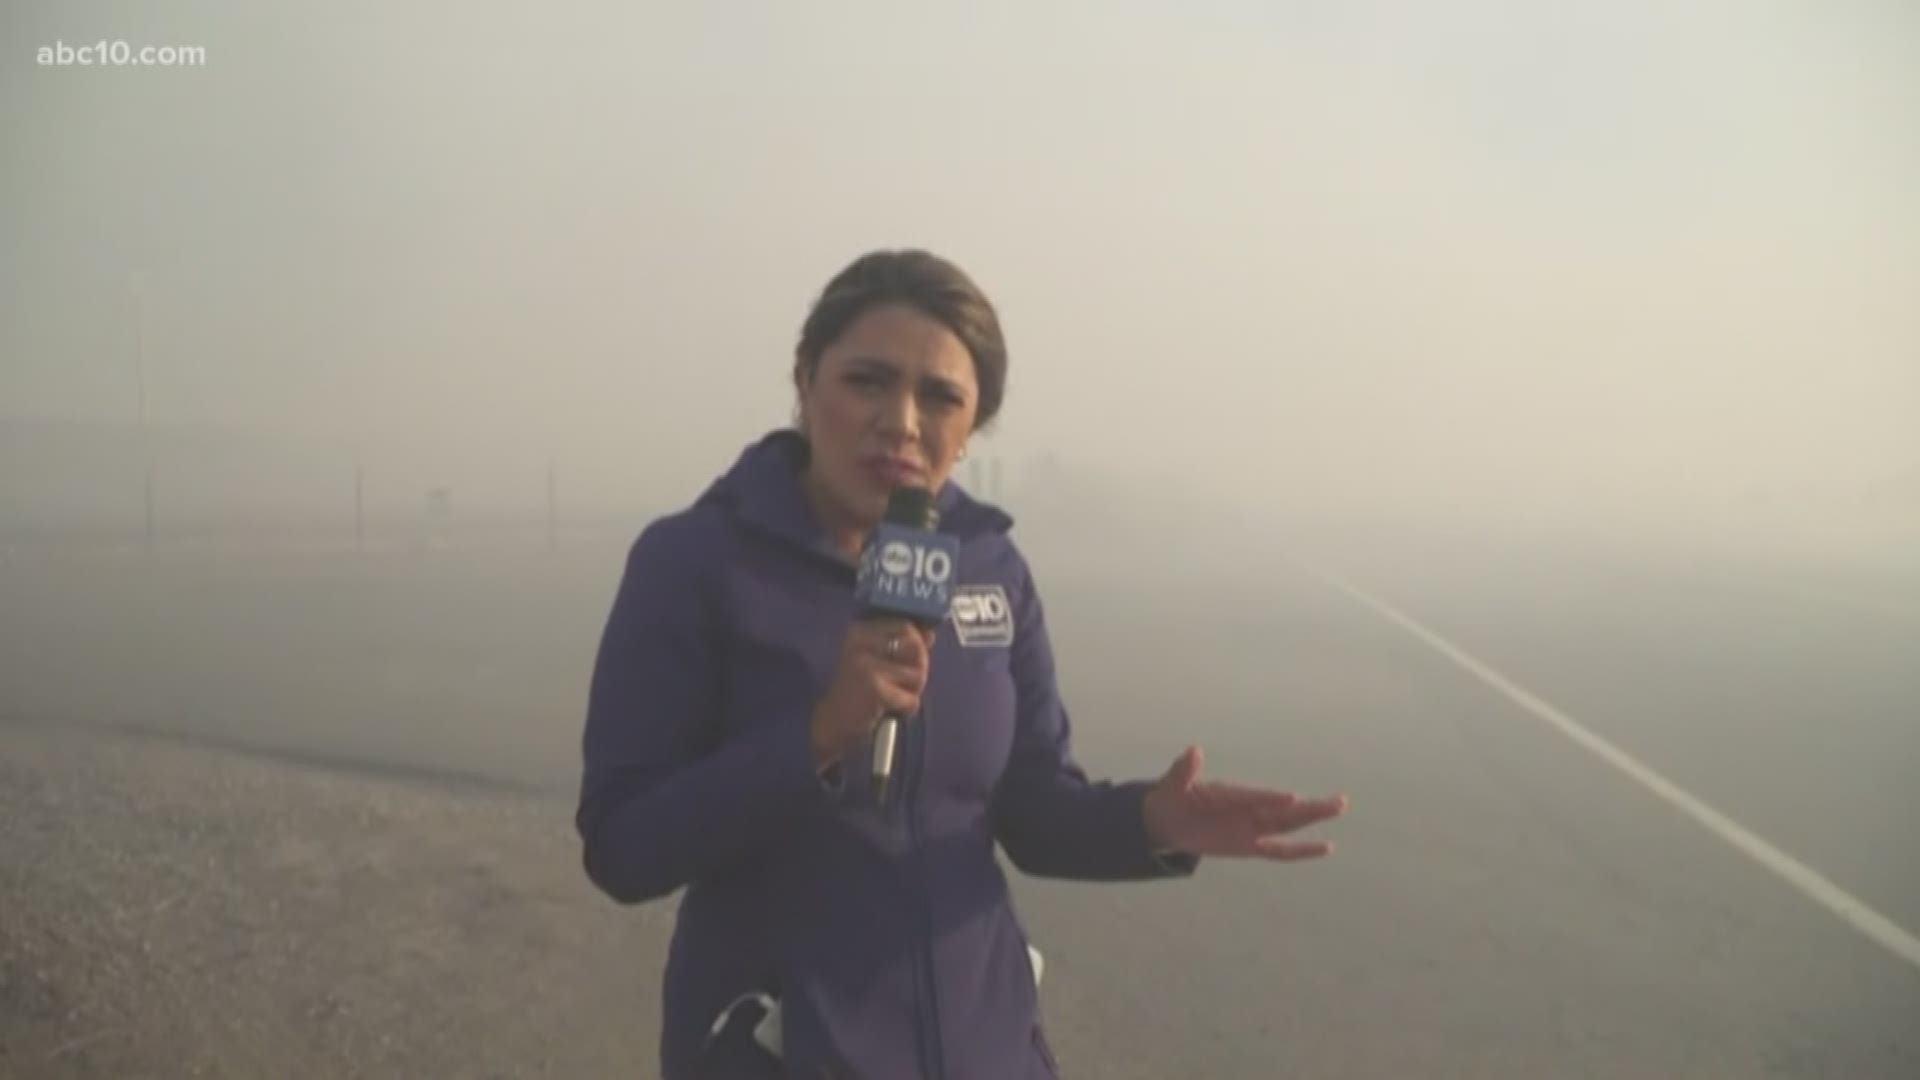 A wind-fueled wildfire breaks out in Rio Vista. ABC10's Daniela Pardo is live with the latest info on the situation.